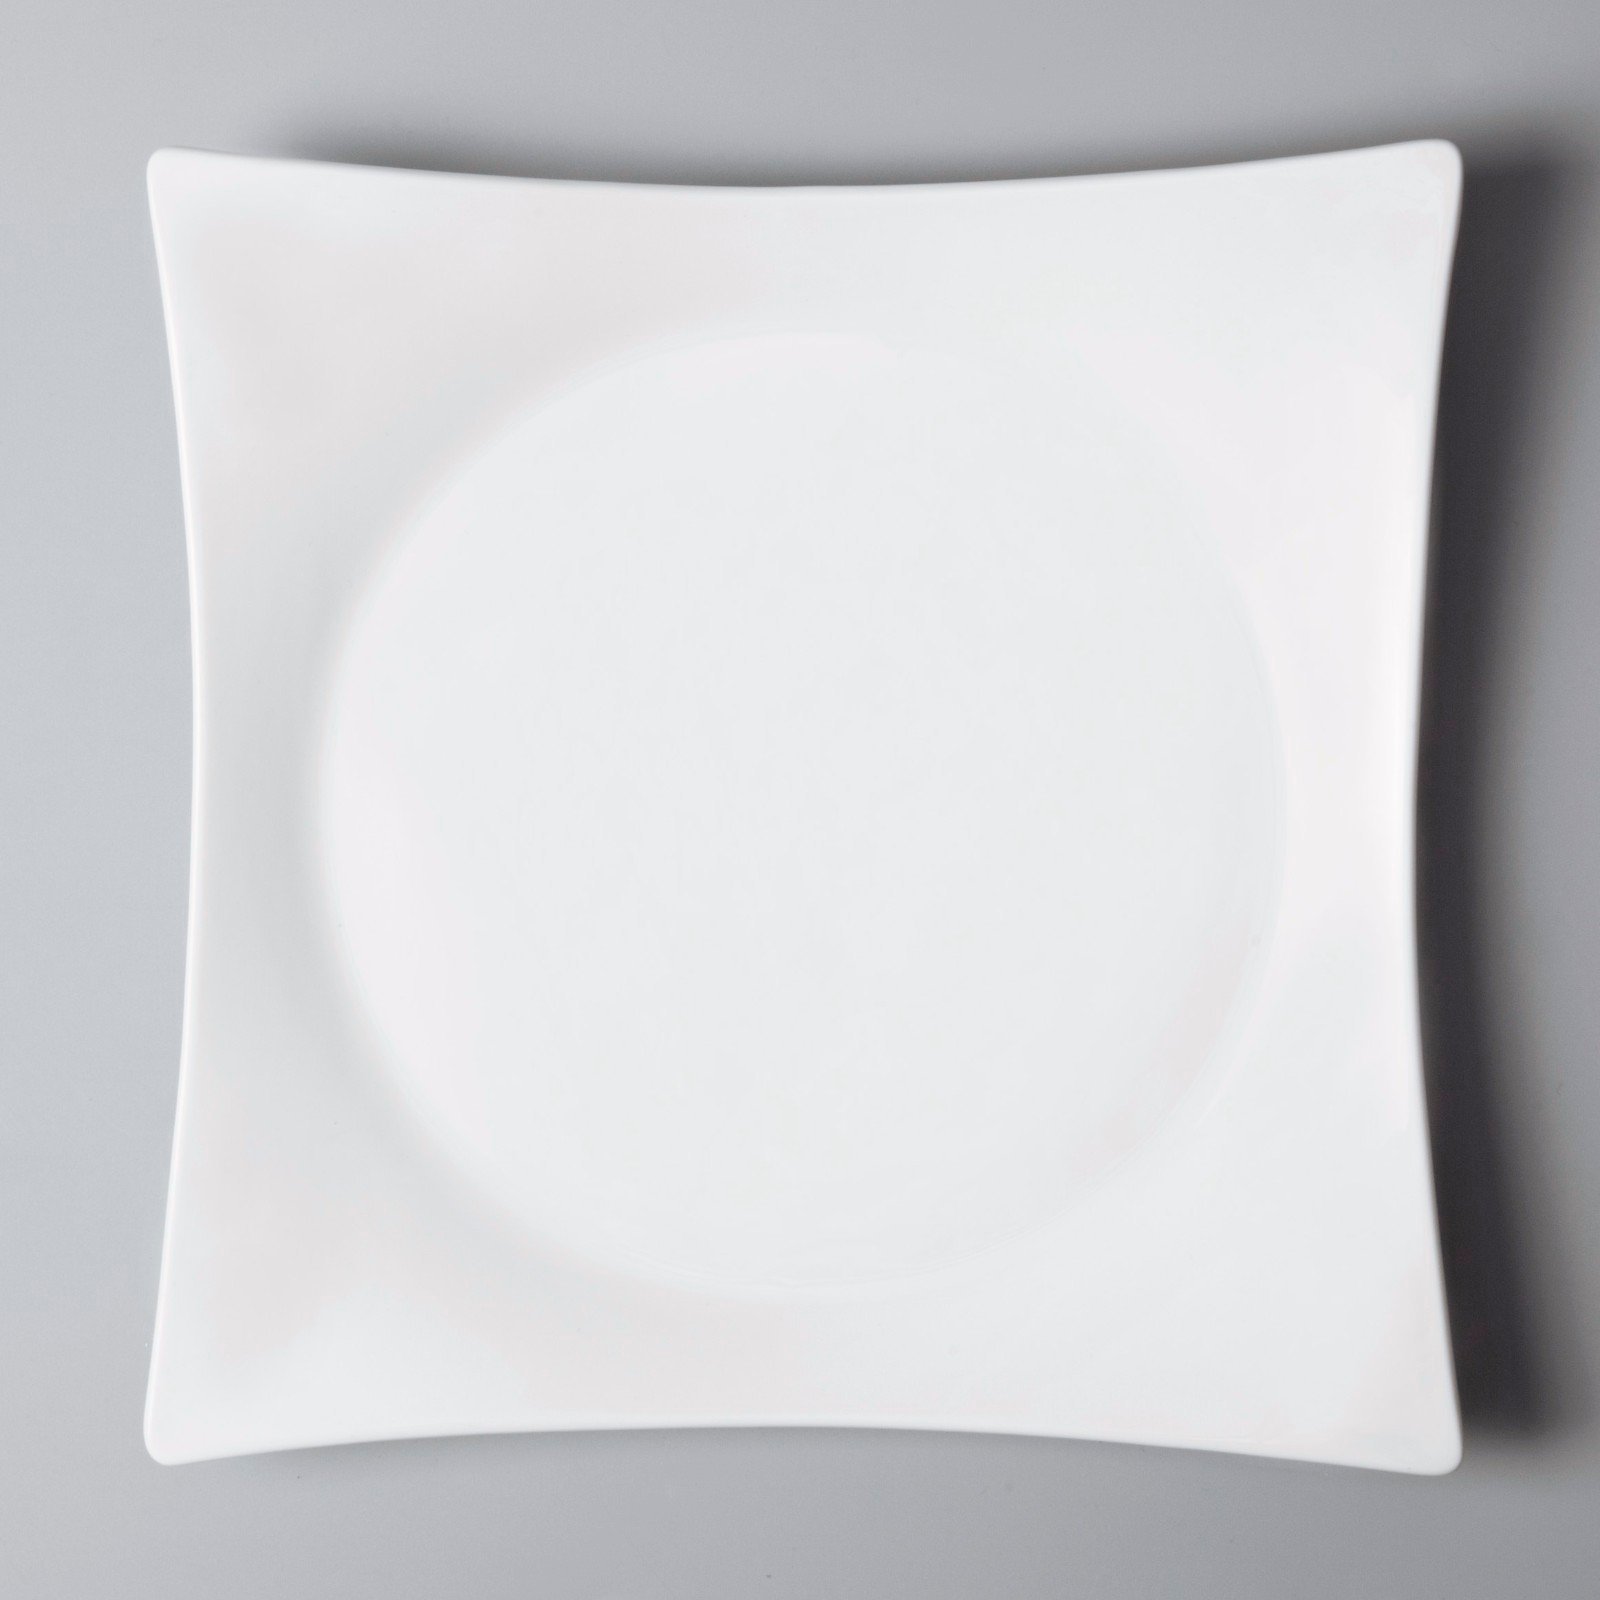 royal white dinnerware sets for 8 french style series for bistro